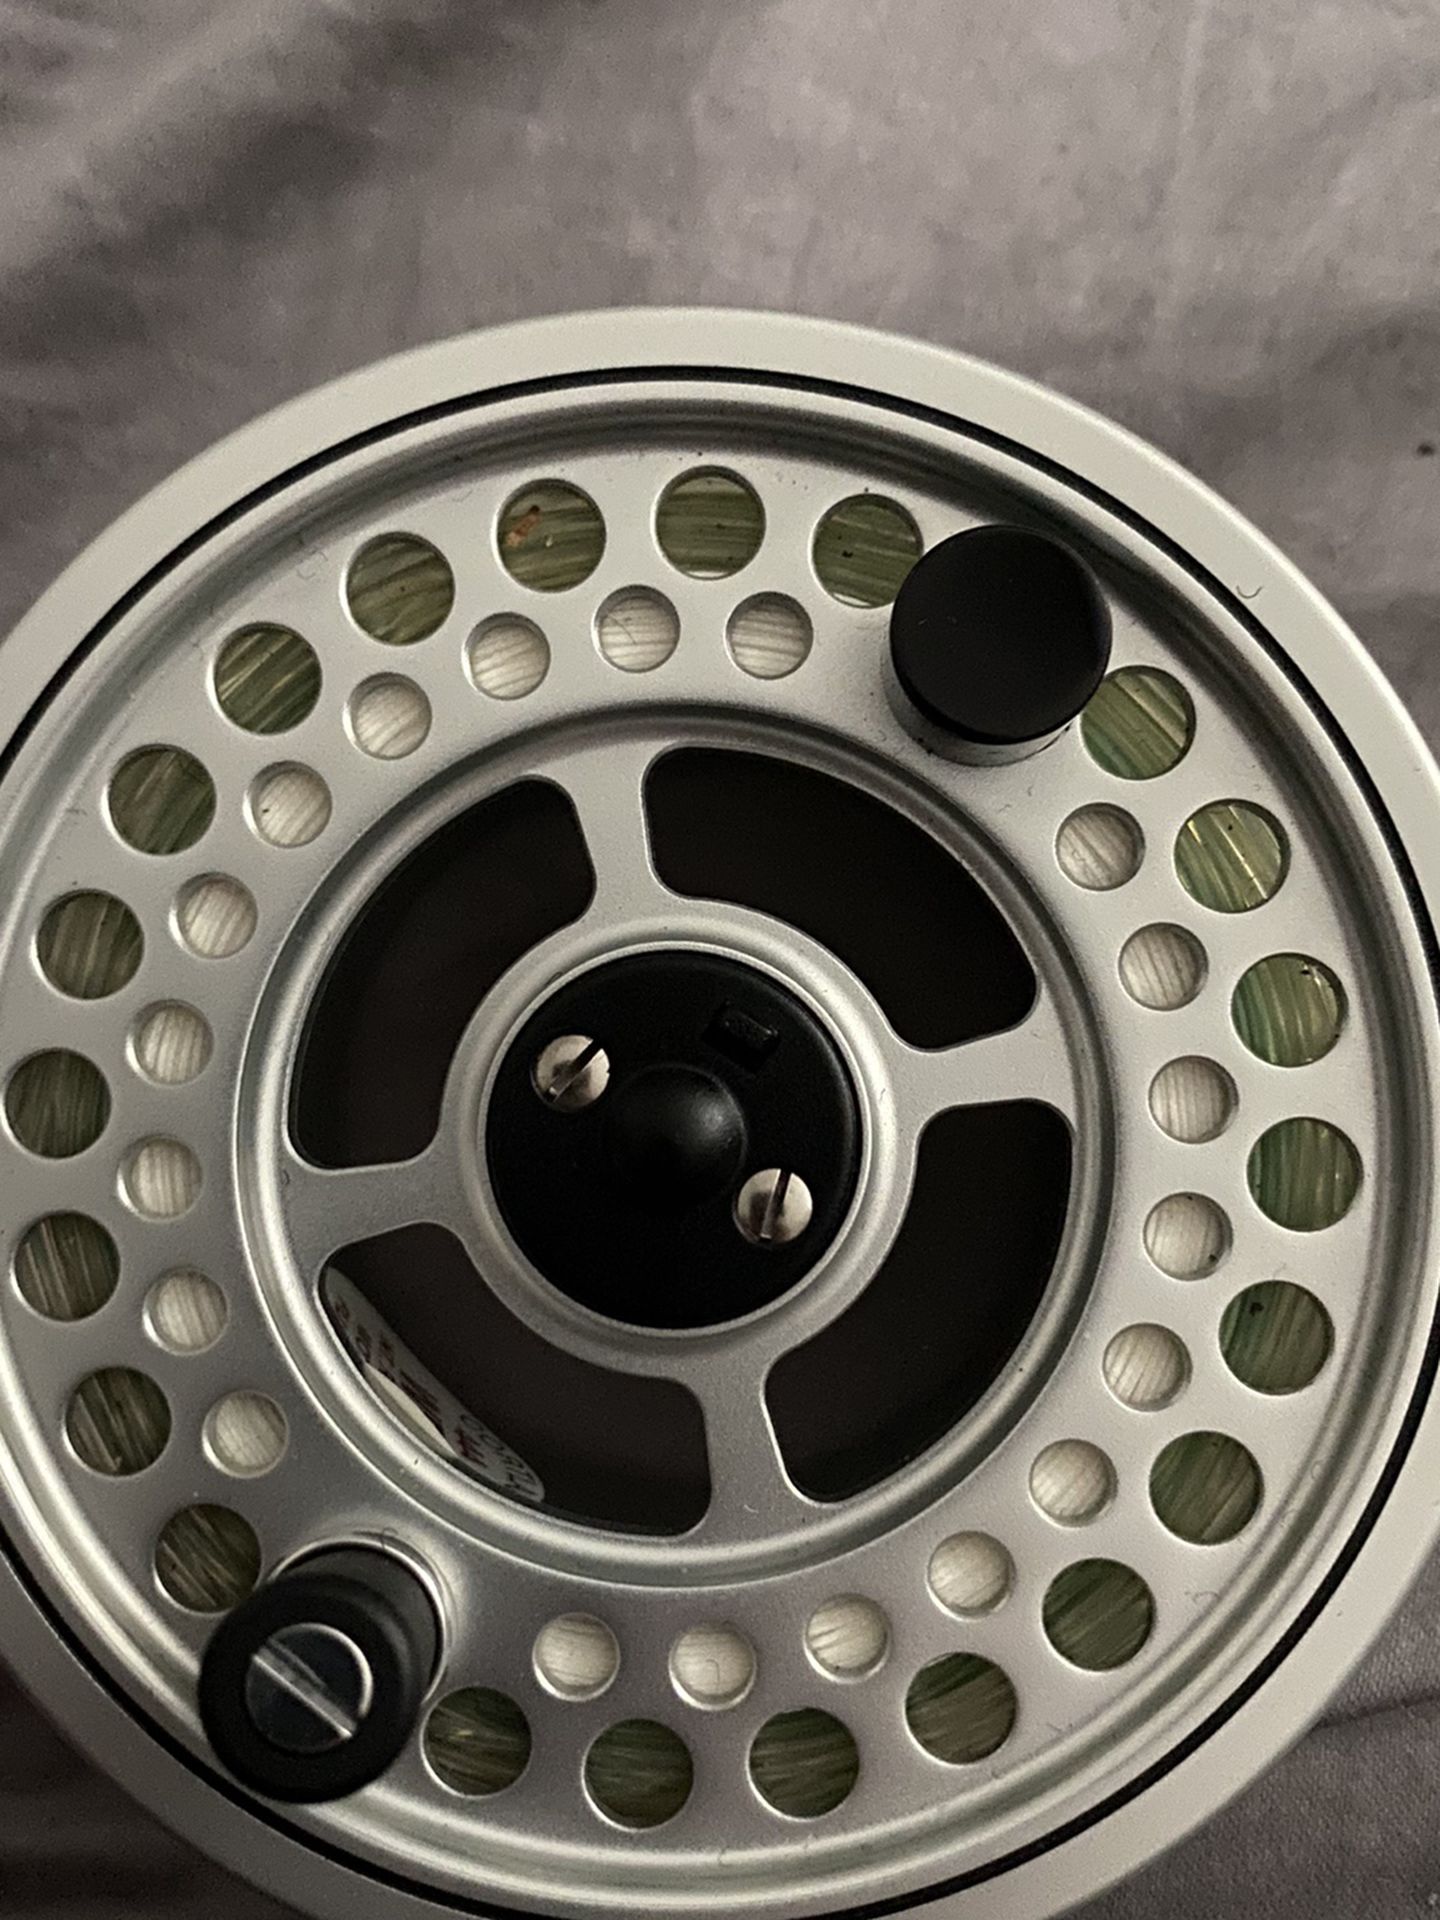 Brand new extra reel spool for a Cortland 444 fly reel